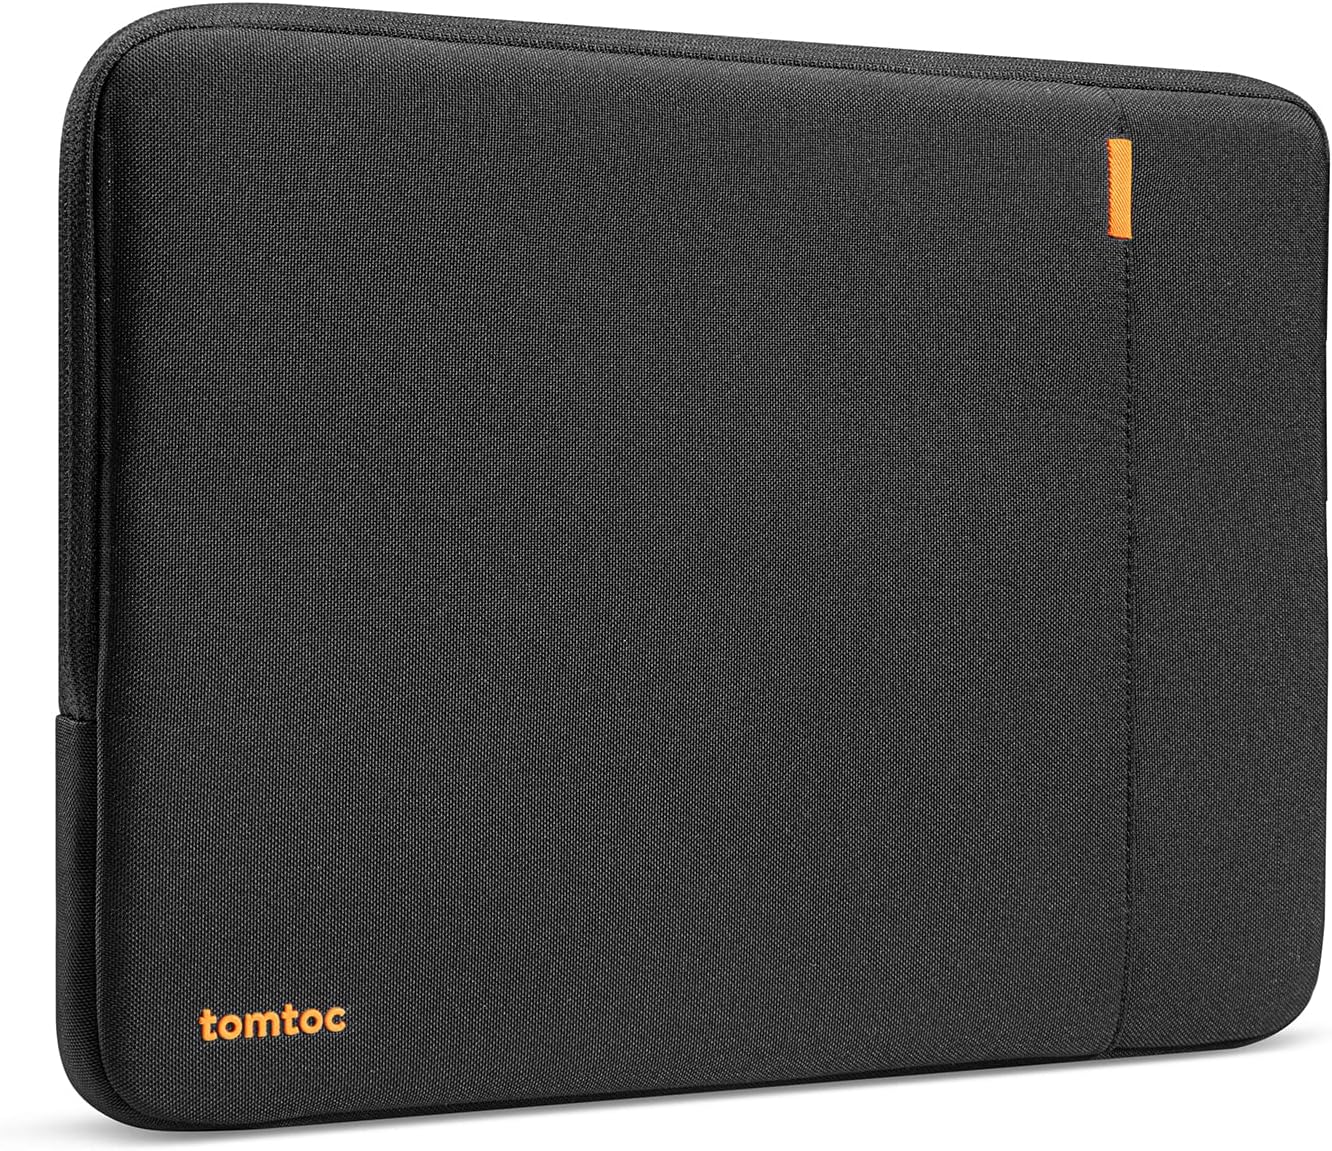 tomtoc 360° Protective Laptop Sleeve for 13-inch [...]